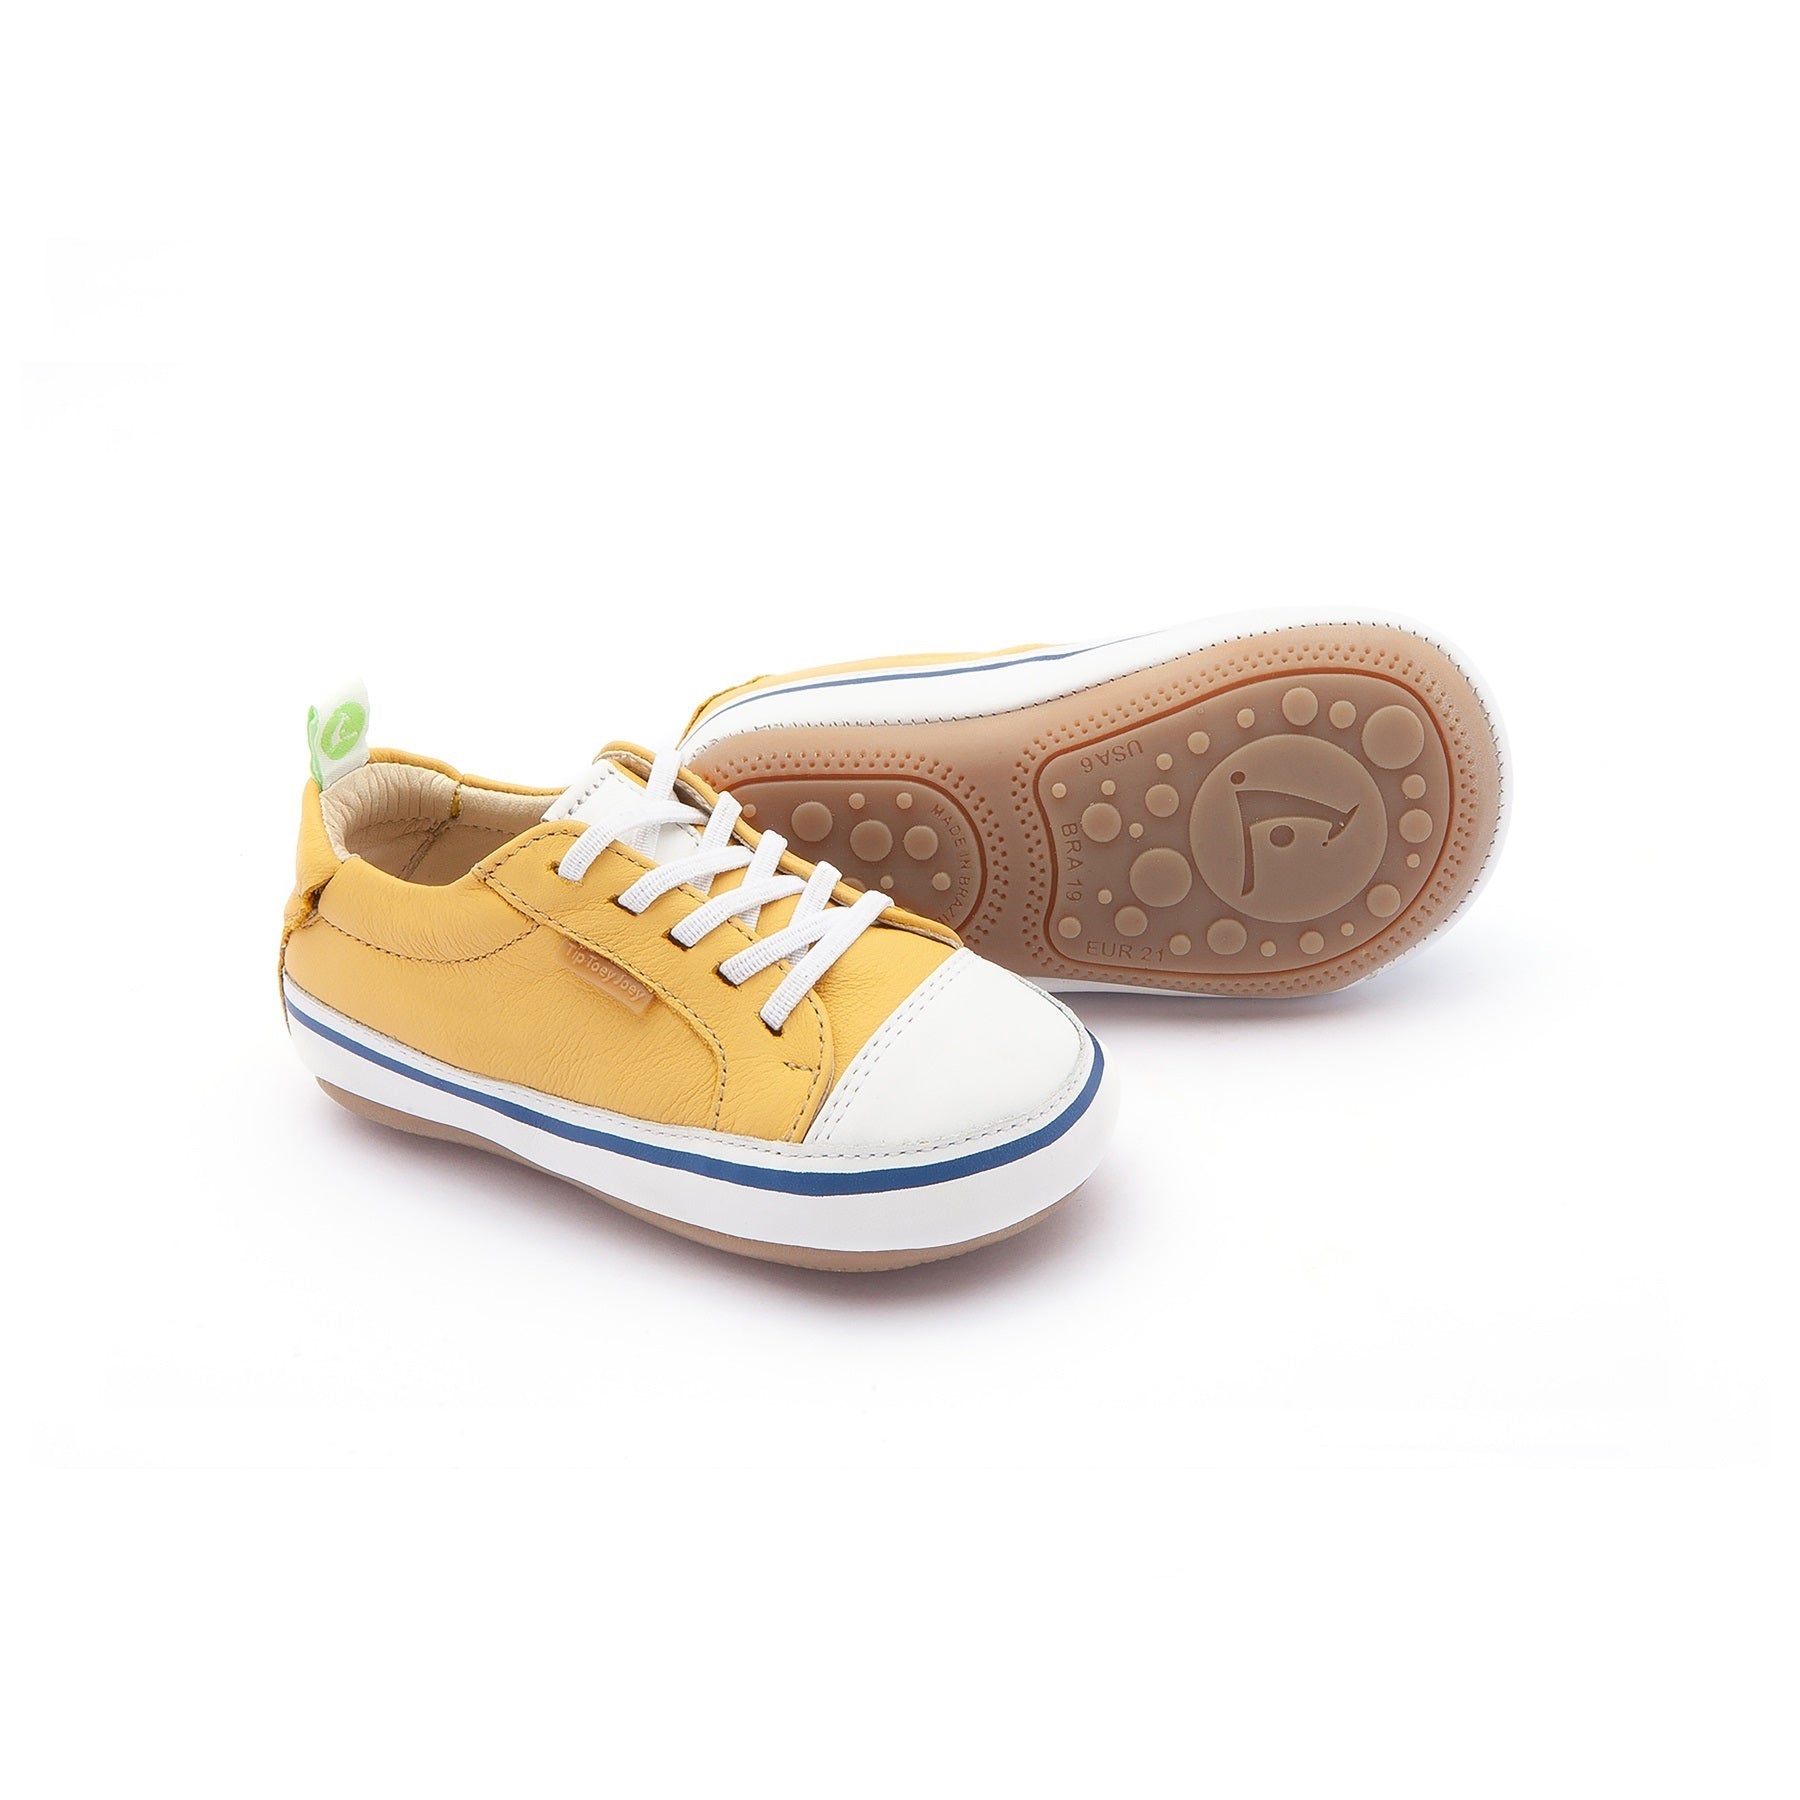 Baby Boys Bright Yellow Leather Shoes